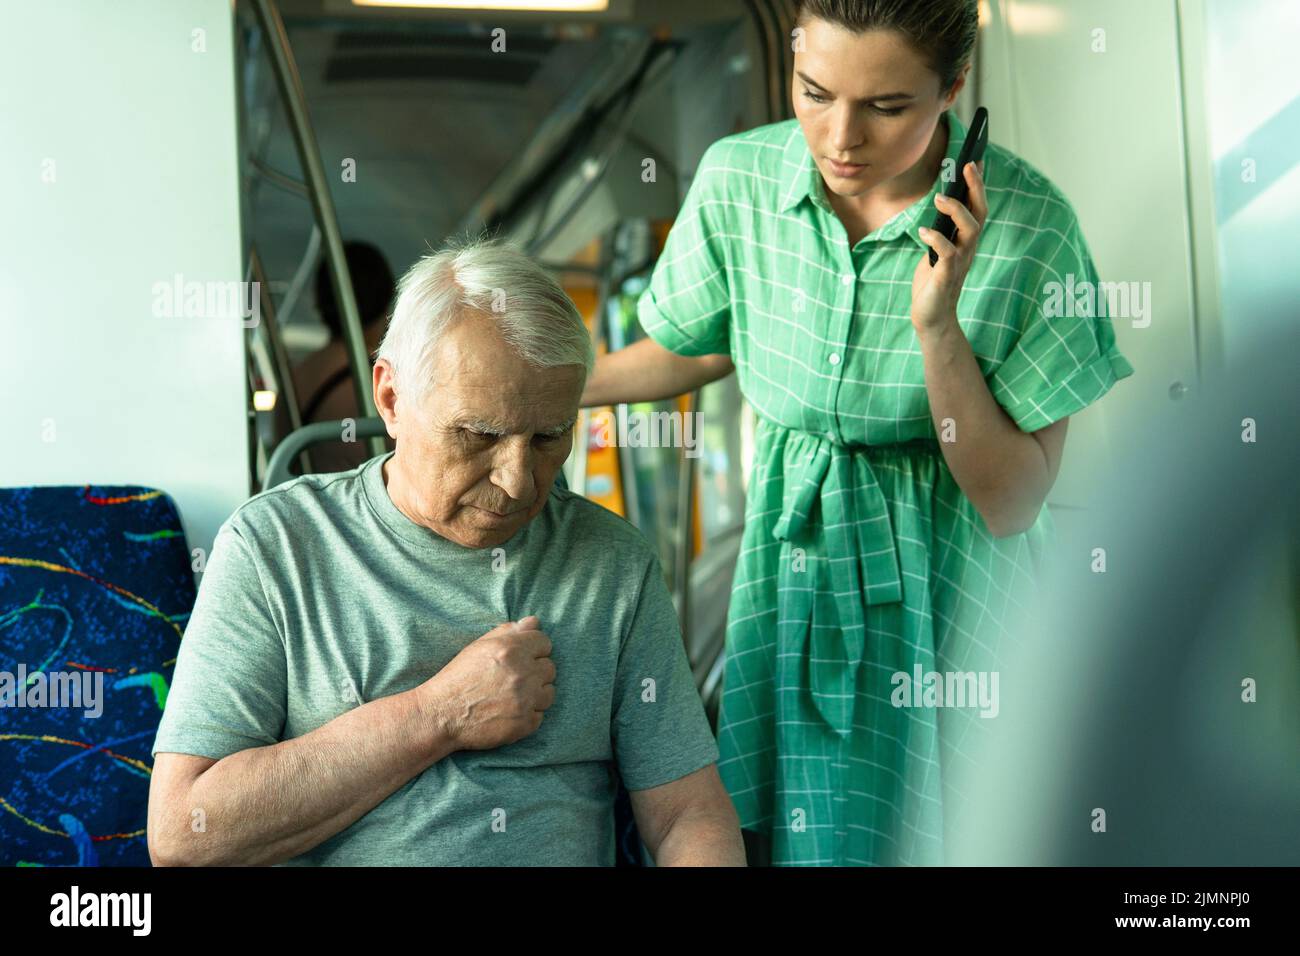 Woman calling to emergency line because elderly man having heart attack symptoms in public transport Stock Photo